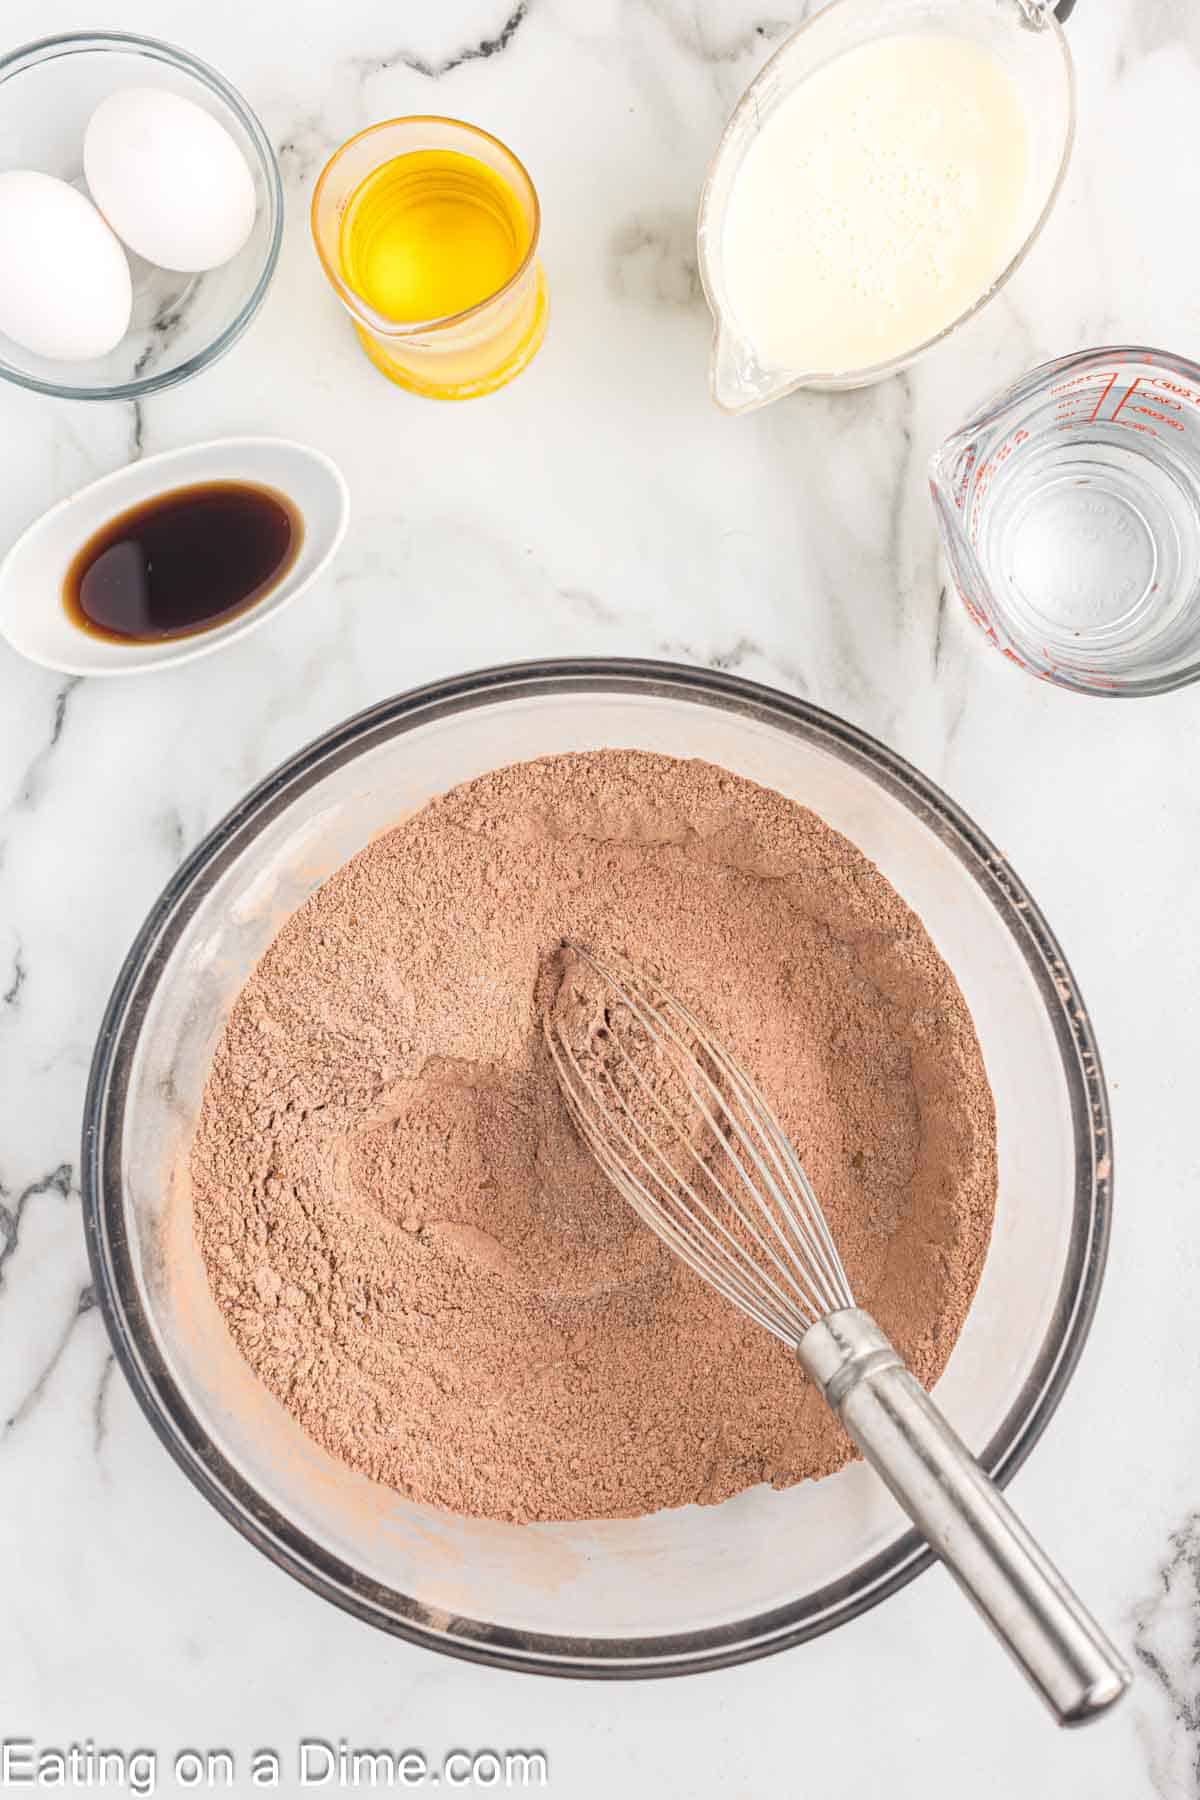 Combine dry ingredients in a bowl with a whisk